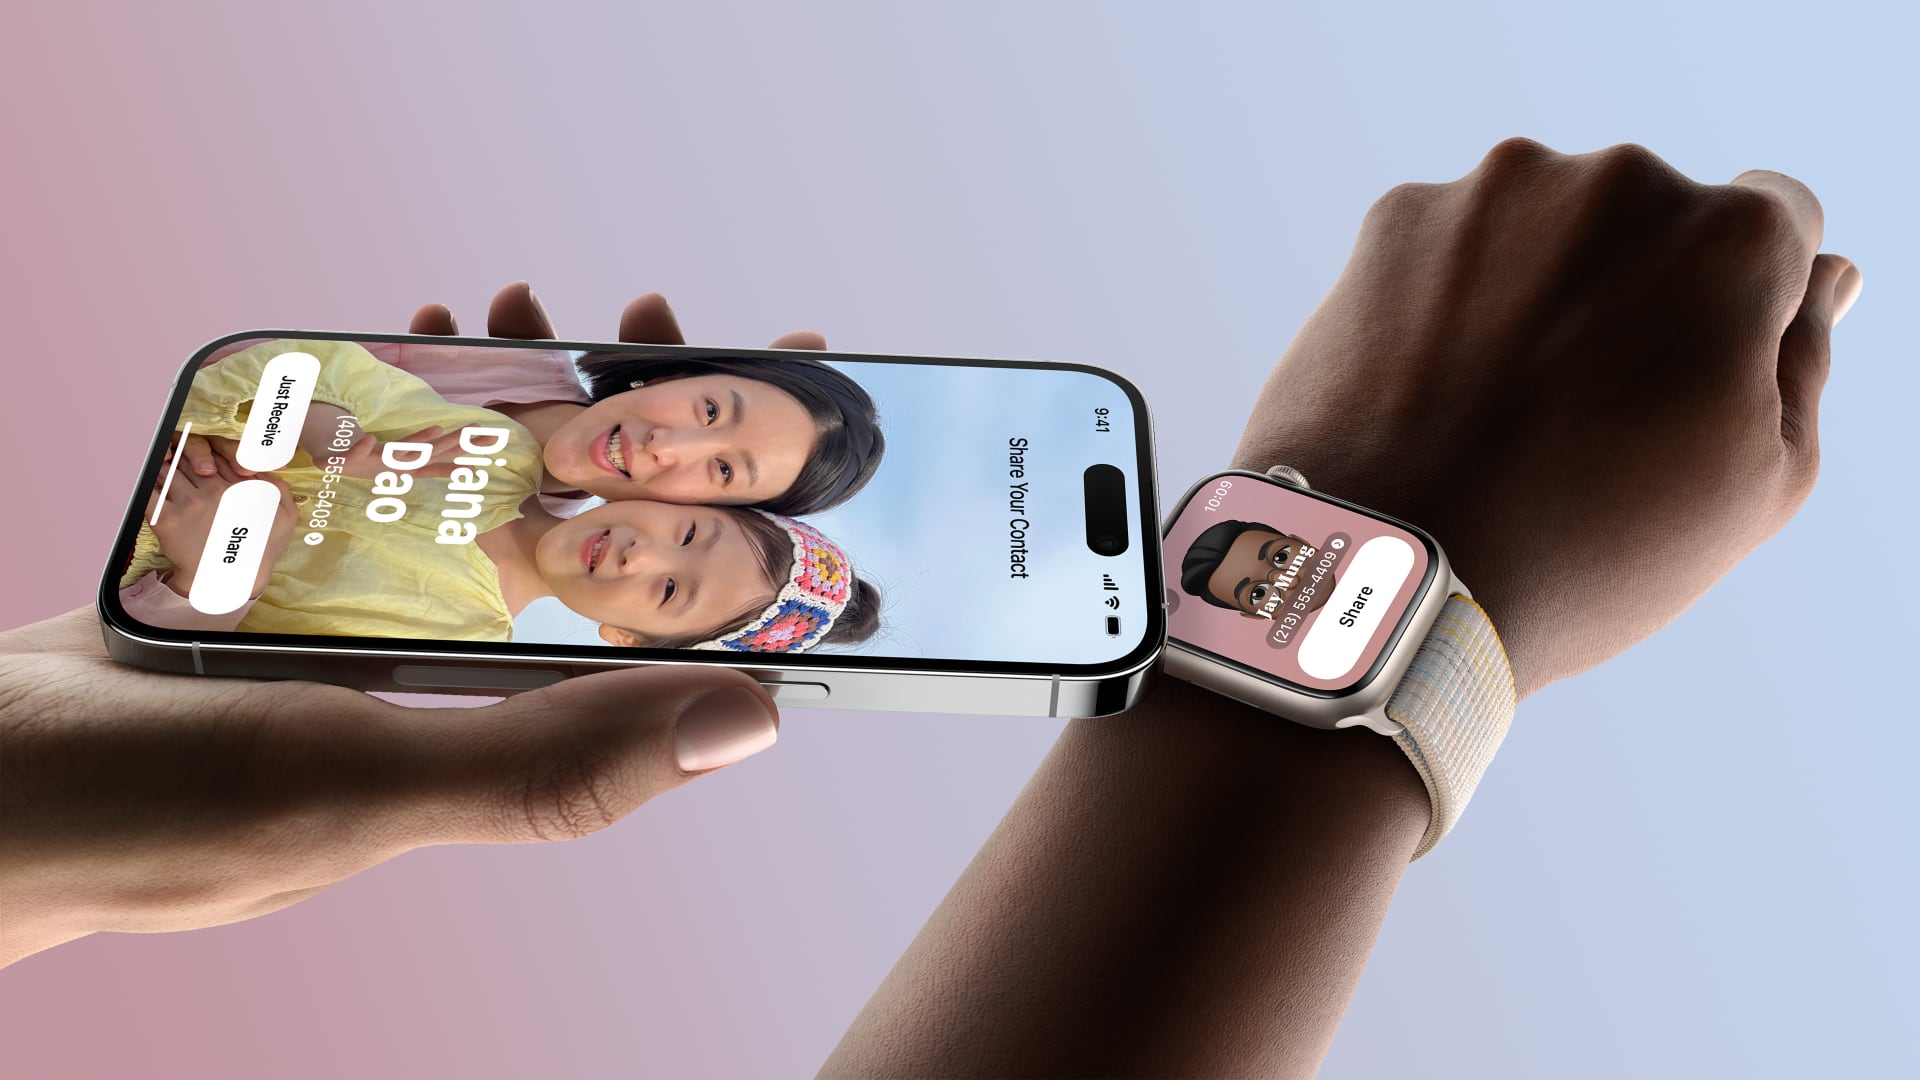 Using NameDrop contact sharing between iPhone anmd Apple Watch